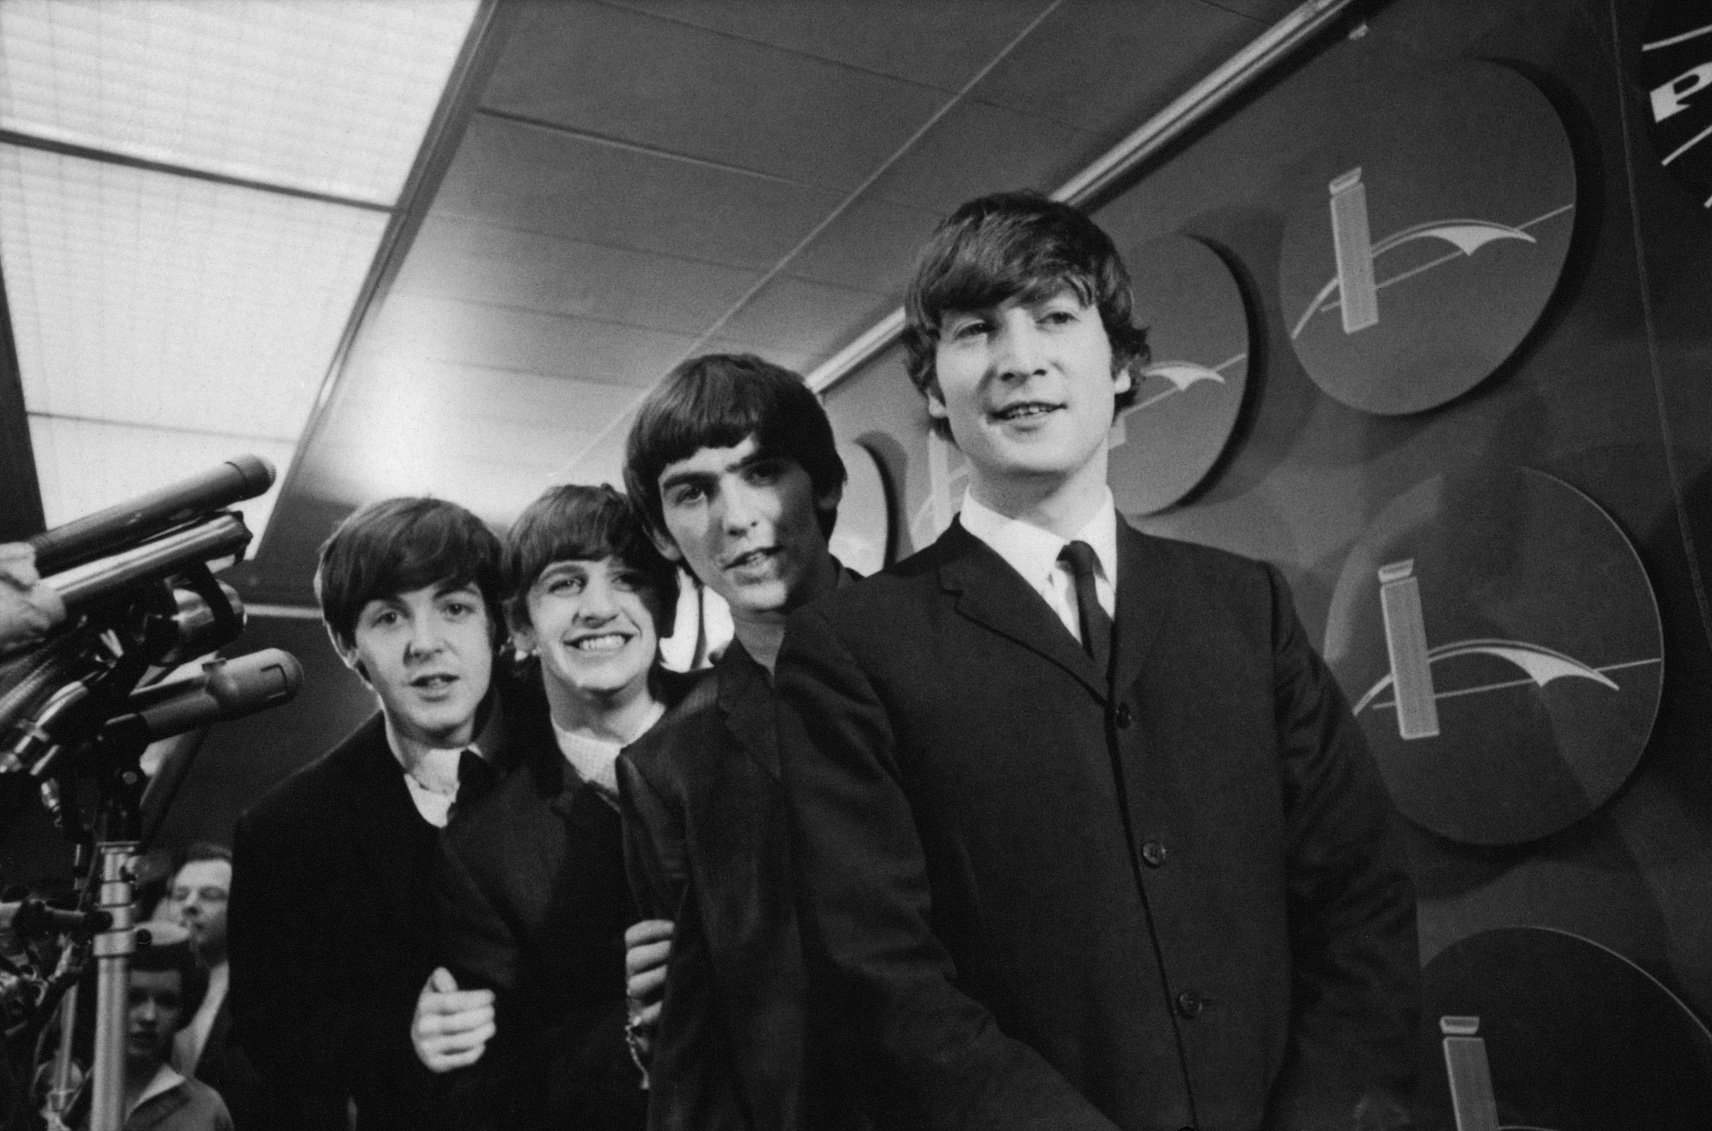 The Beatles arrive at in New York in 1964